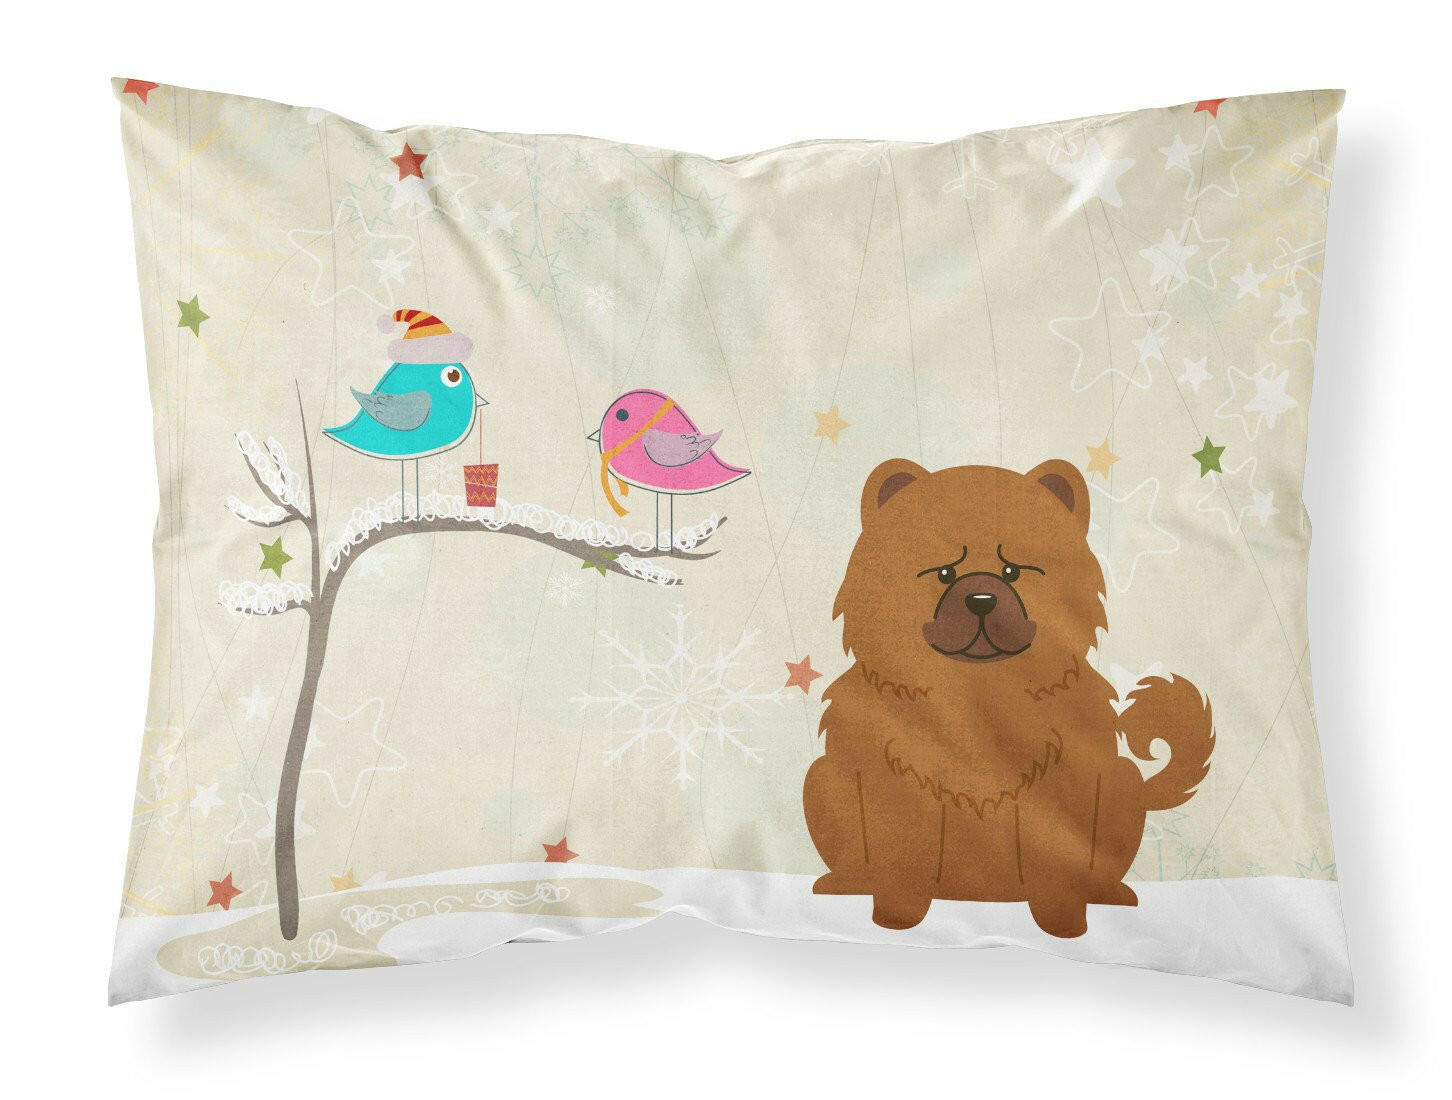 Christmas Presents between Friends Chow Chow Red Fabric Standard Pillowcase BB2614PILLOWCASE by Caroline's Treasures